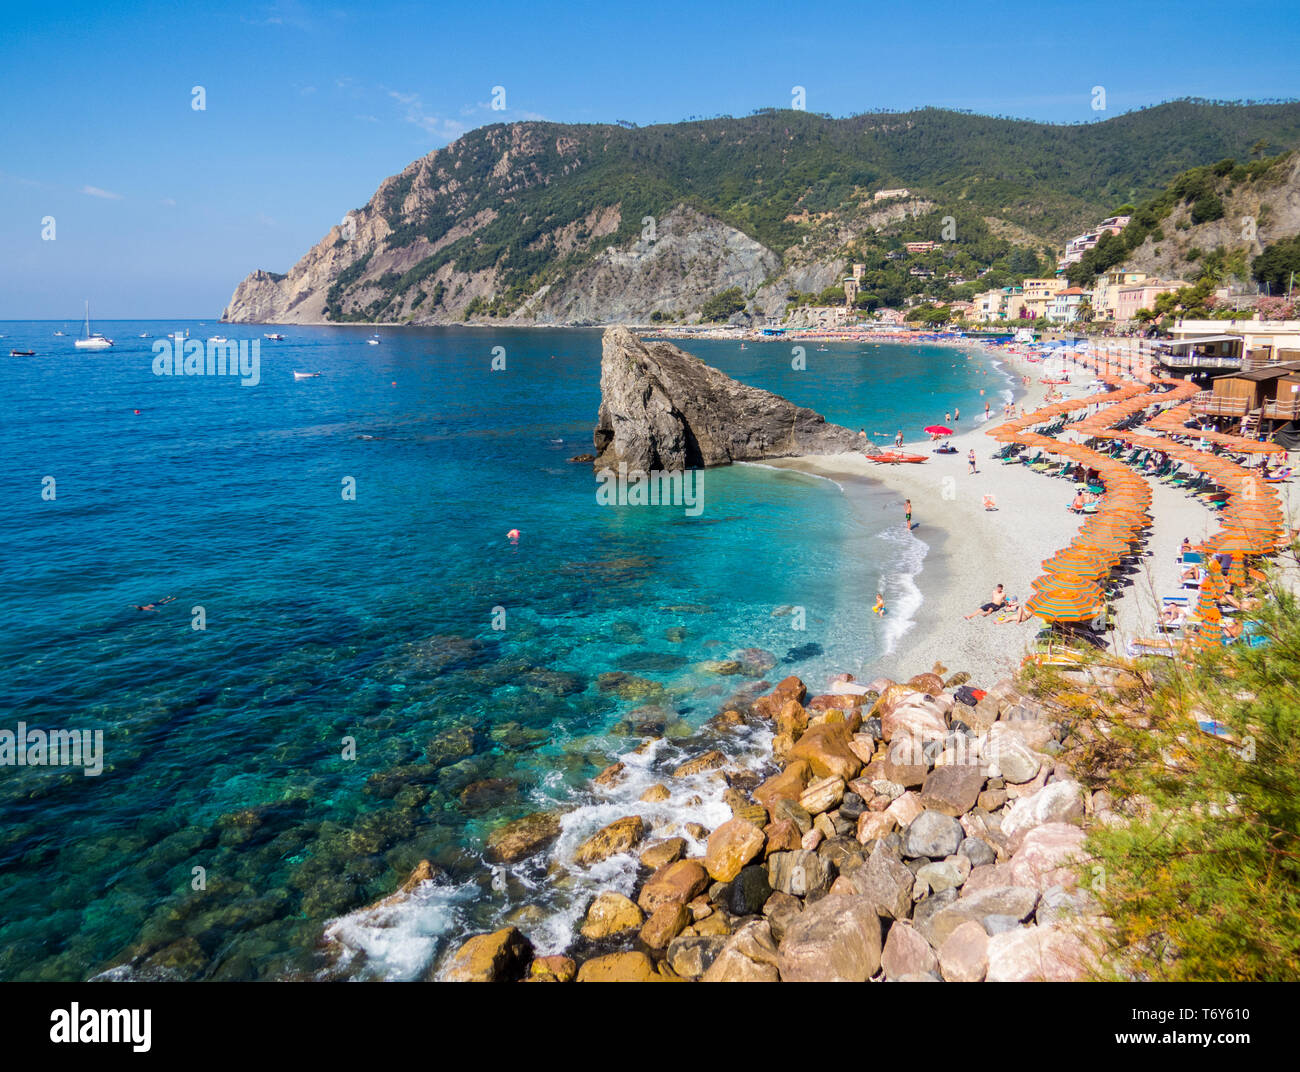 MONTEROSSO AL MARE, ITALY - JULY 28, 2016: Panoramic summer view of the beach in Monterosso, Cinque Terre, Italy. Stock Photo